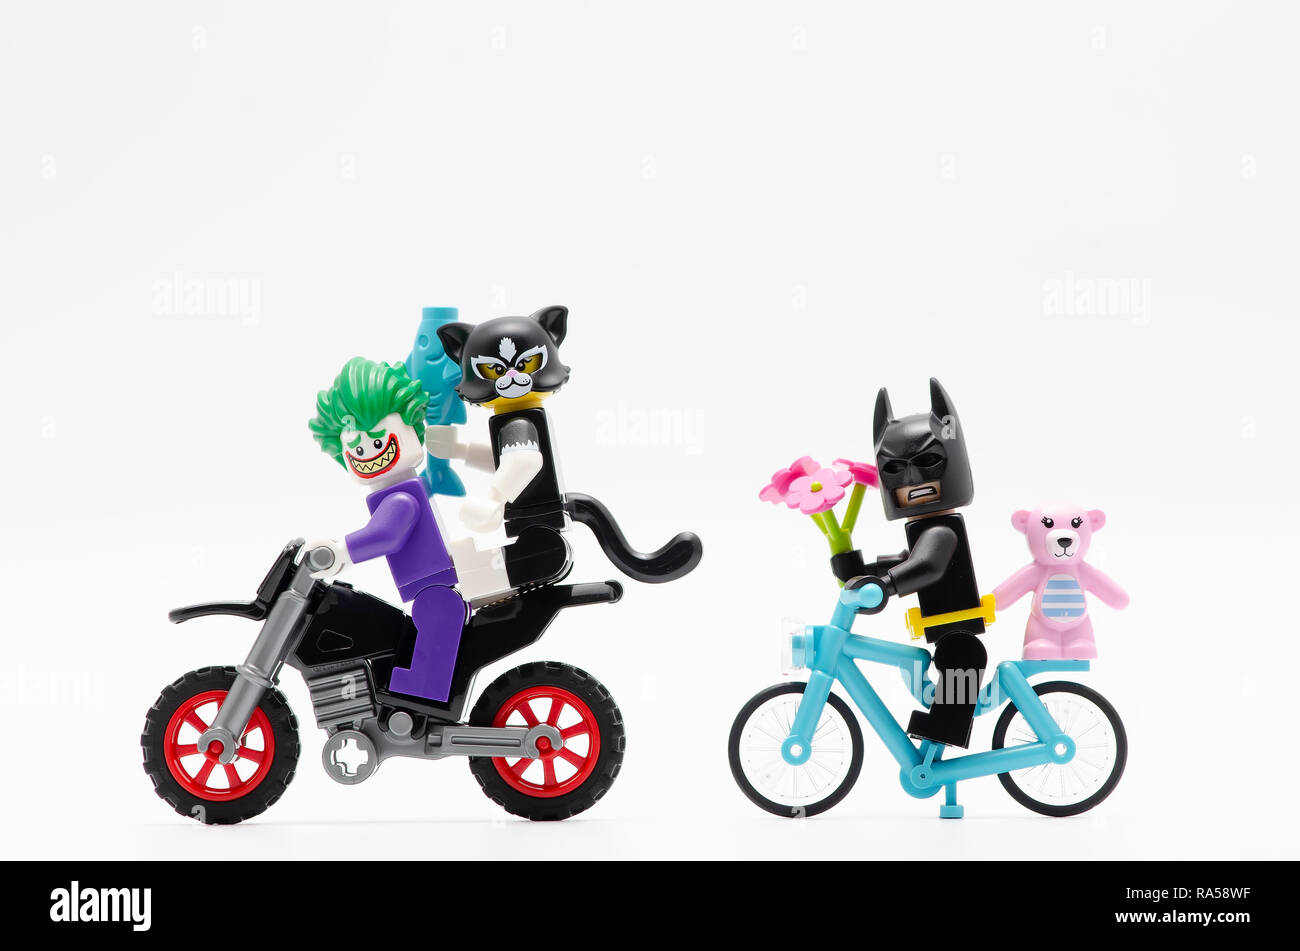 joker riding motorcycle with cat women and batman riding bicycle. Lego minifigures are manufactured by The Lego Group. Stock Photo